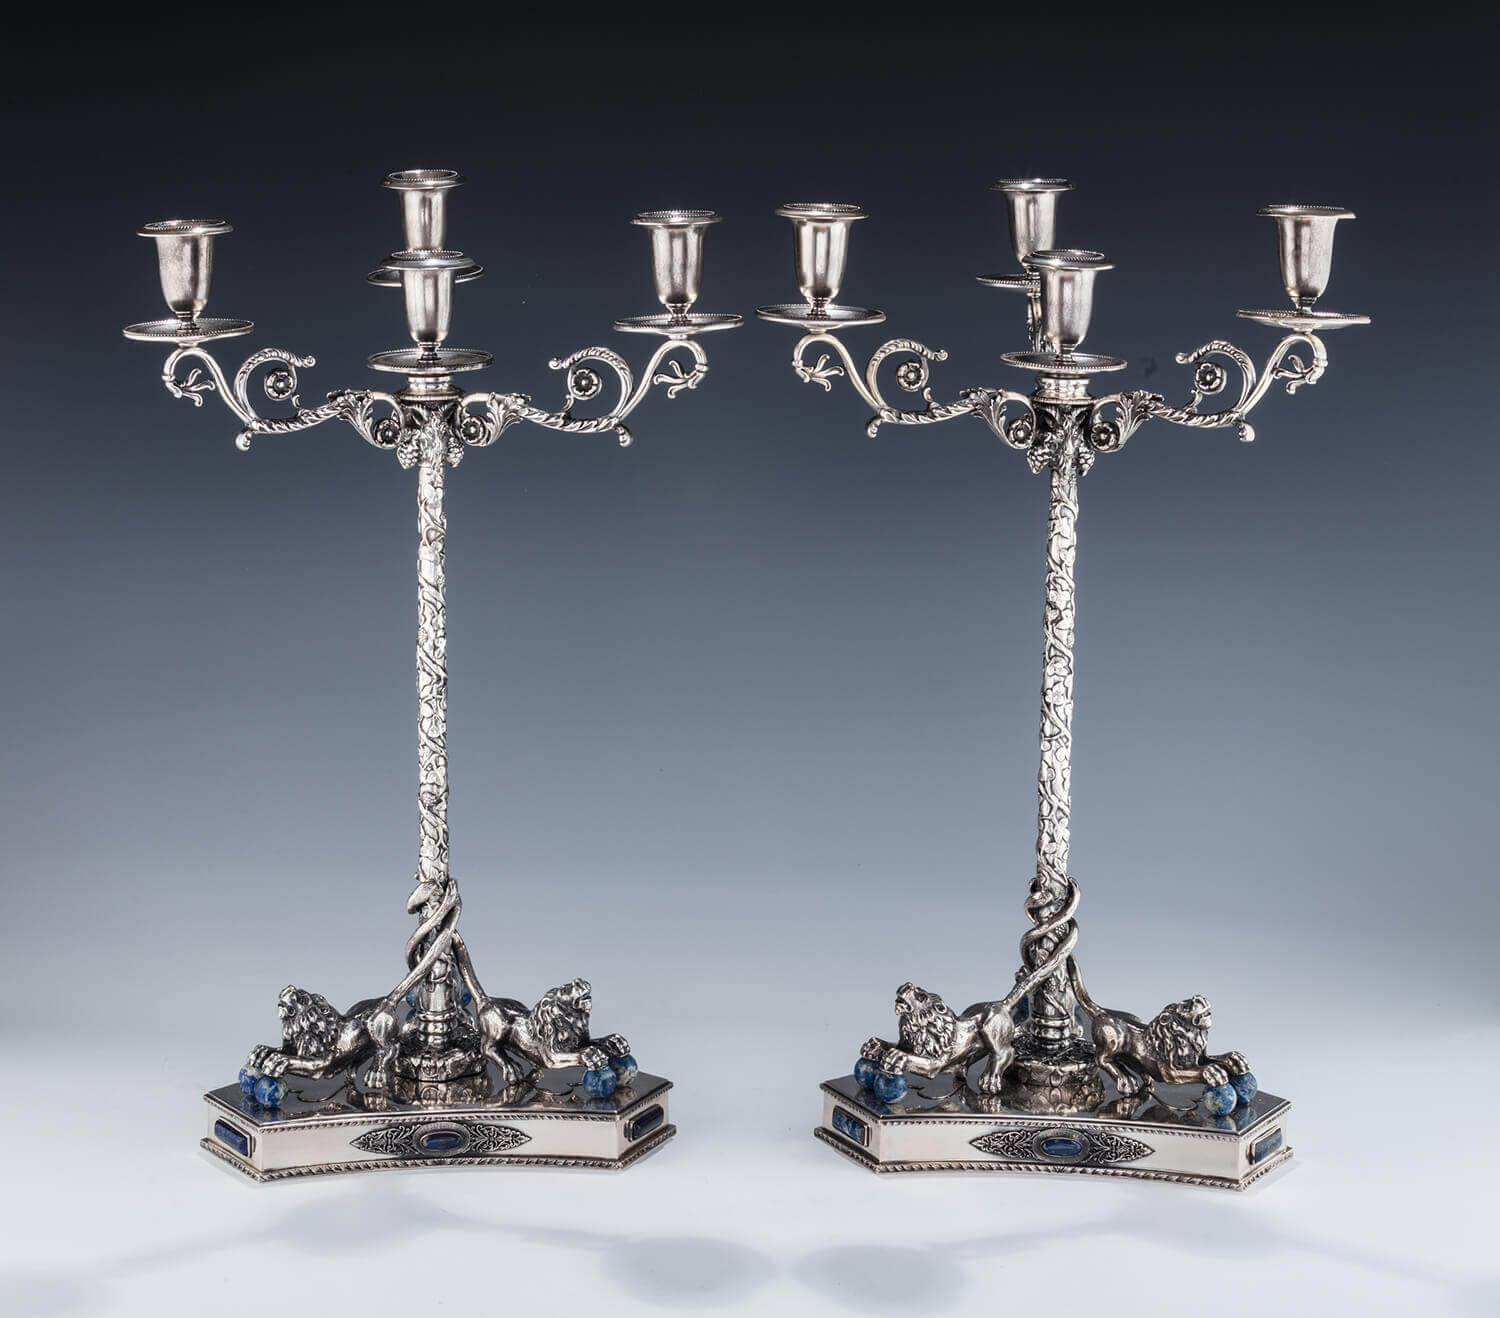 136. A PAIR OF STERLING SILVER CANDELABRAS BY BUCCELLATI